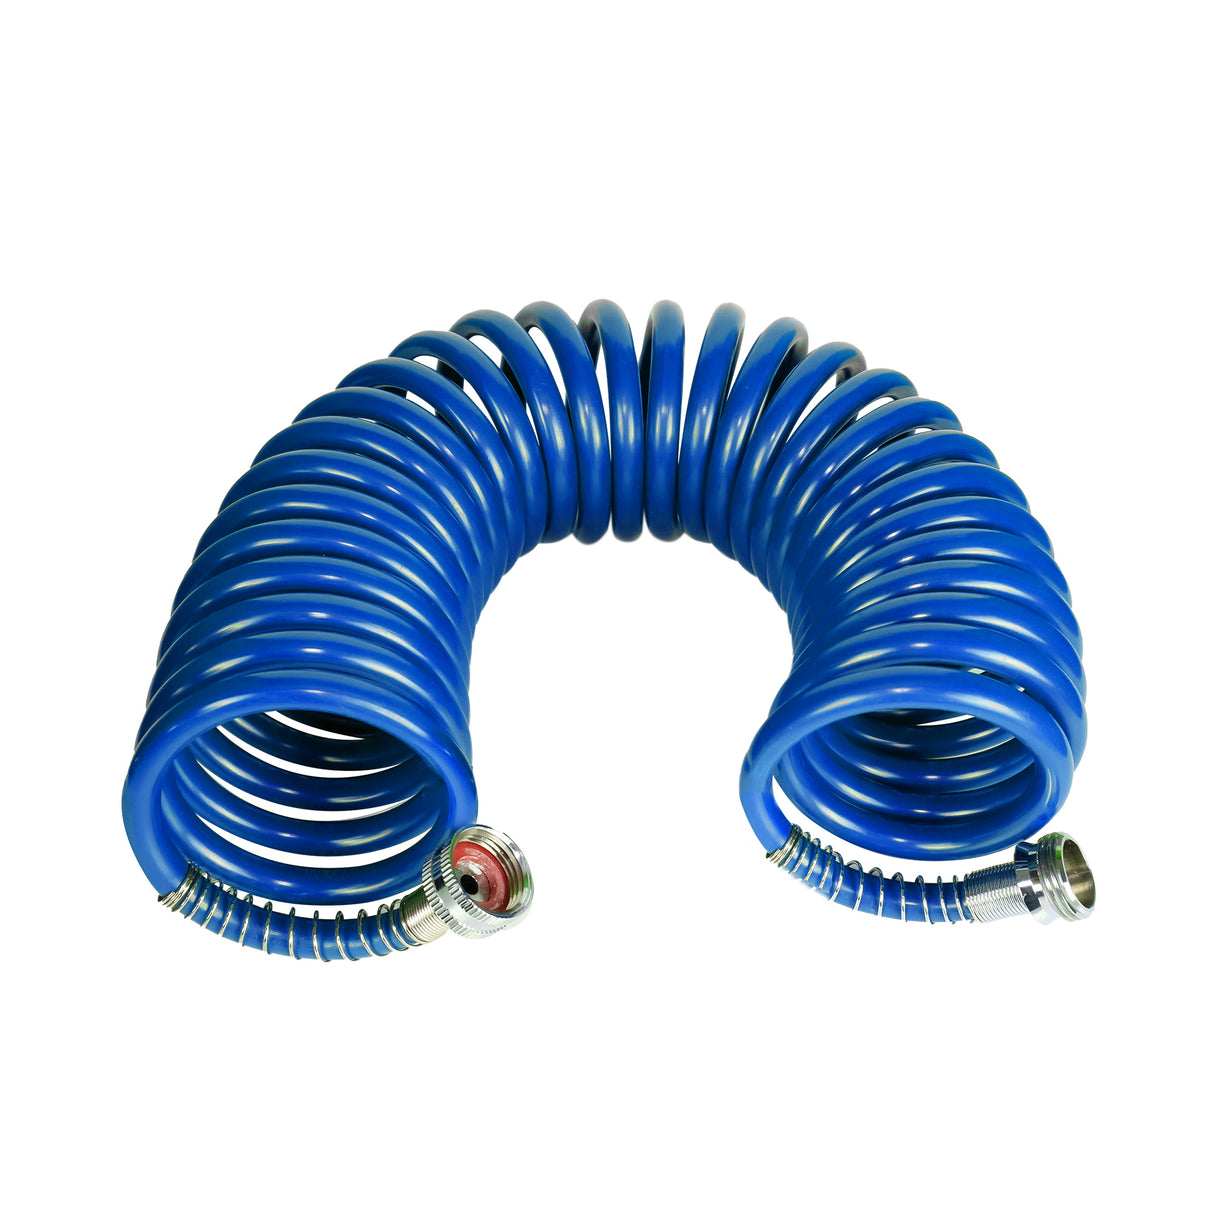 Avagard Recoil Water Hose 3/8" X 25'